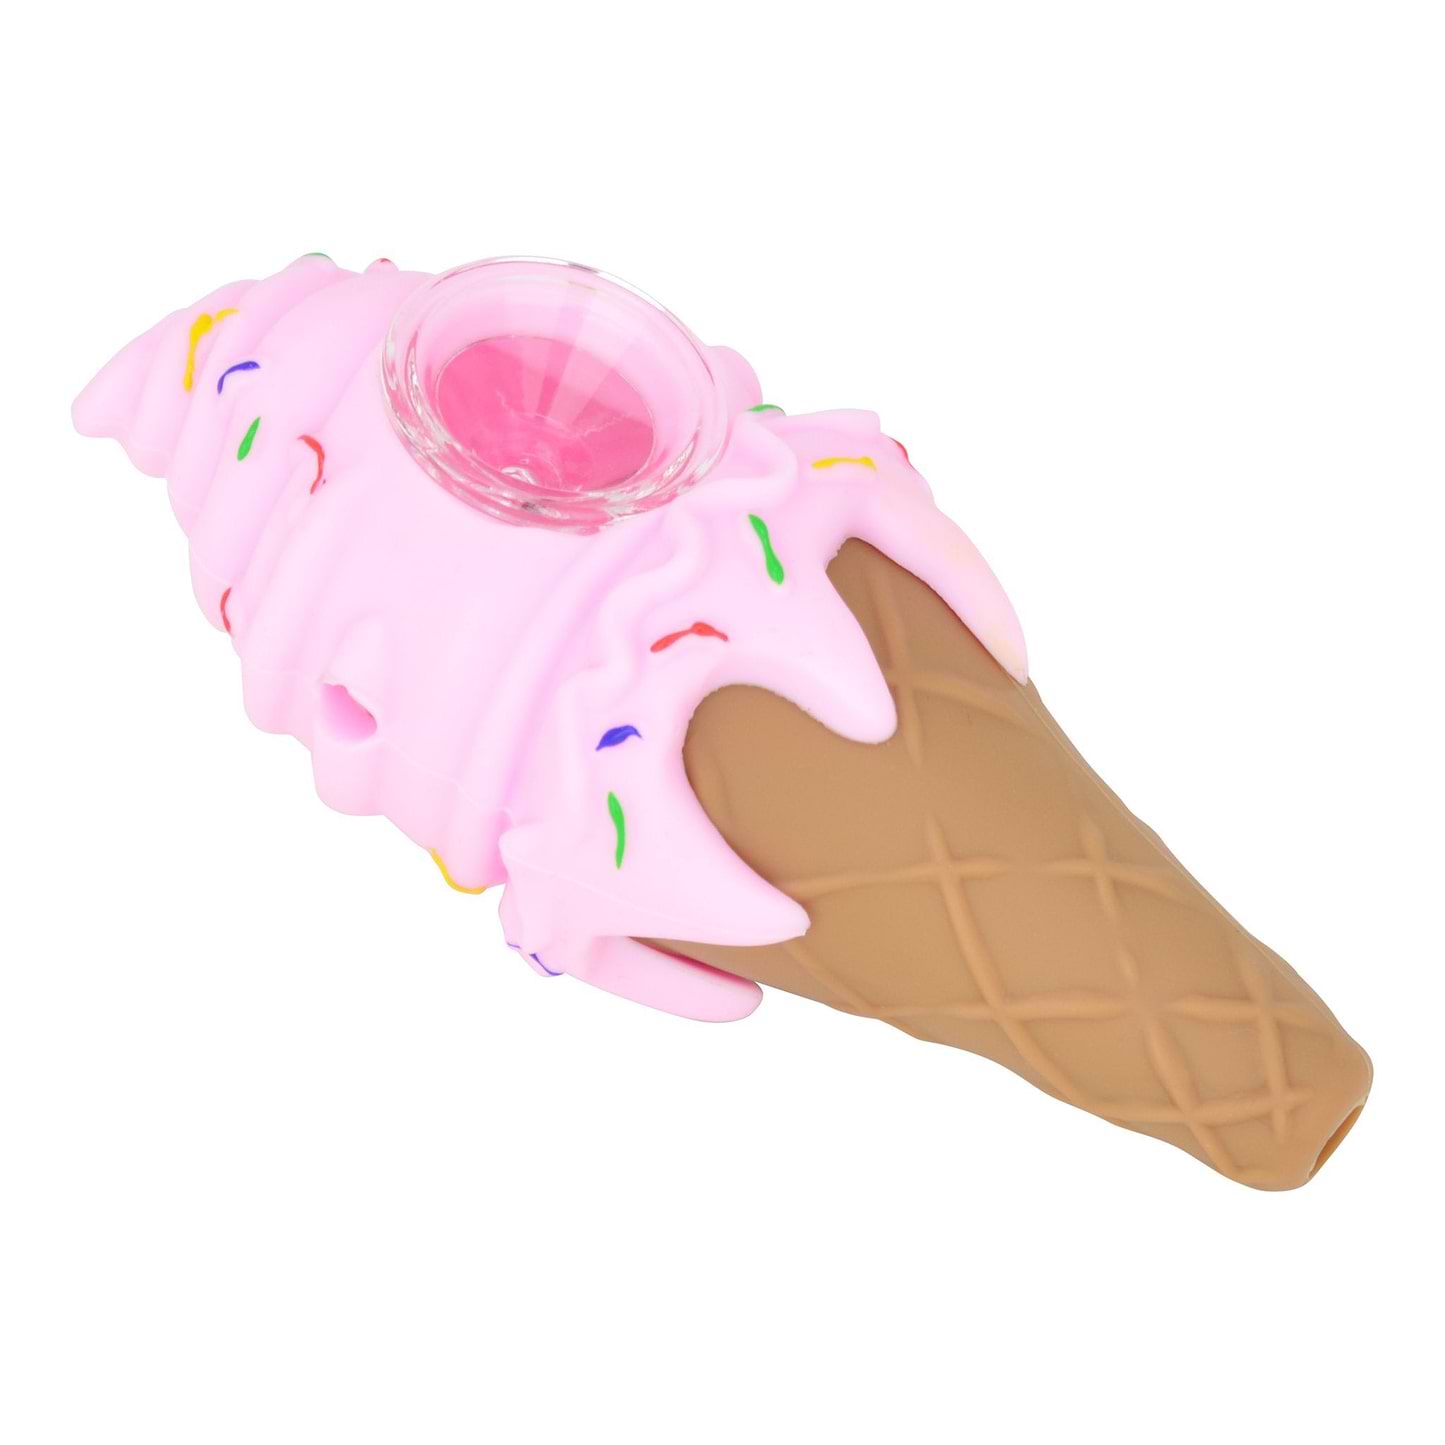 5-inch shatterproof and easy-to-hold silicone smoking device with a fun strawberry ice cream cone design